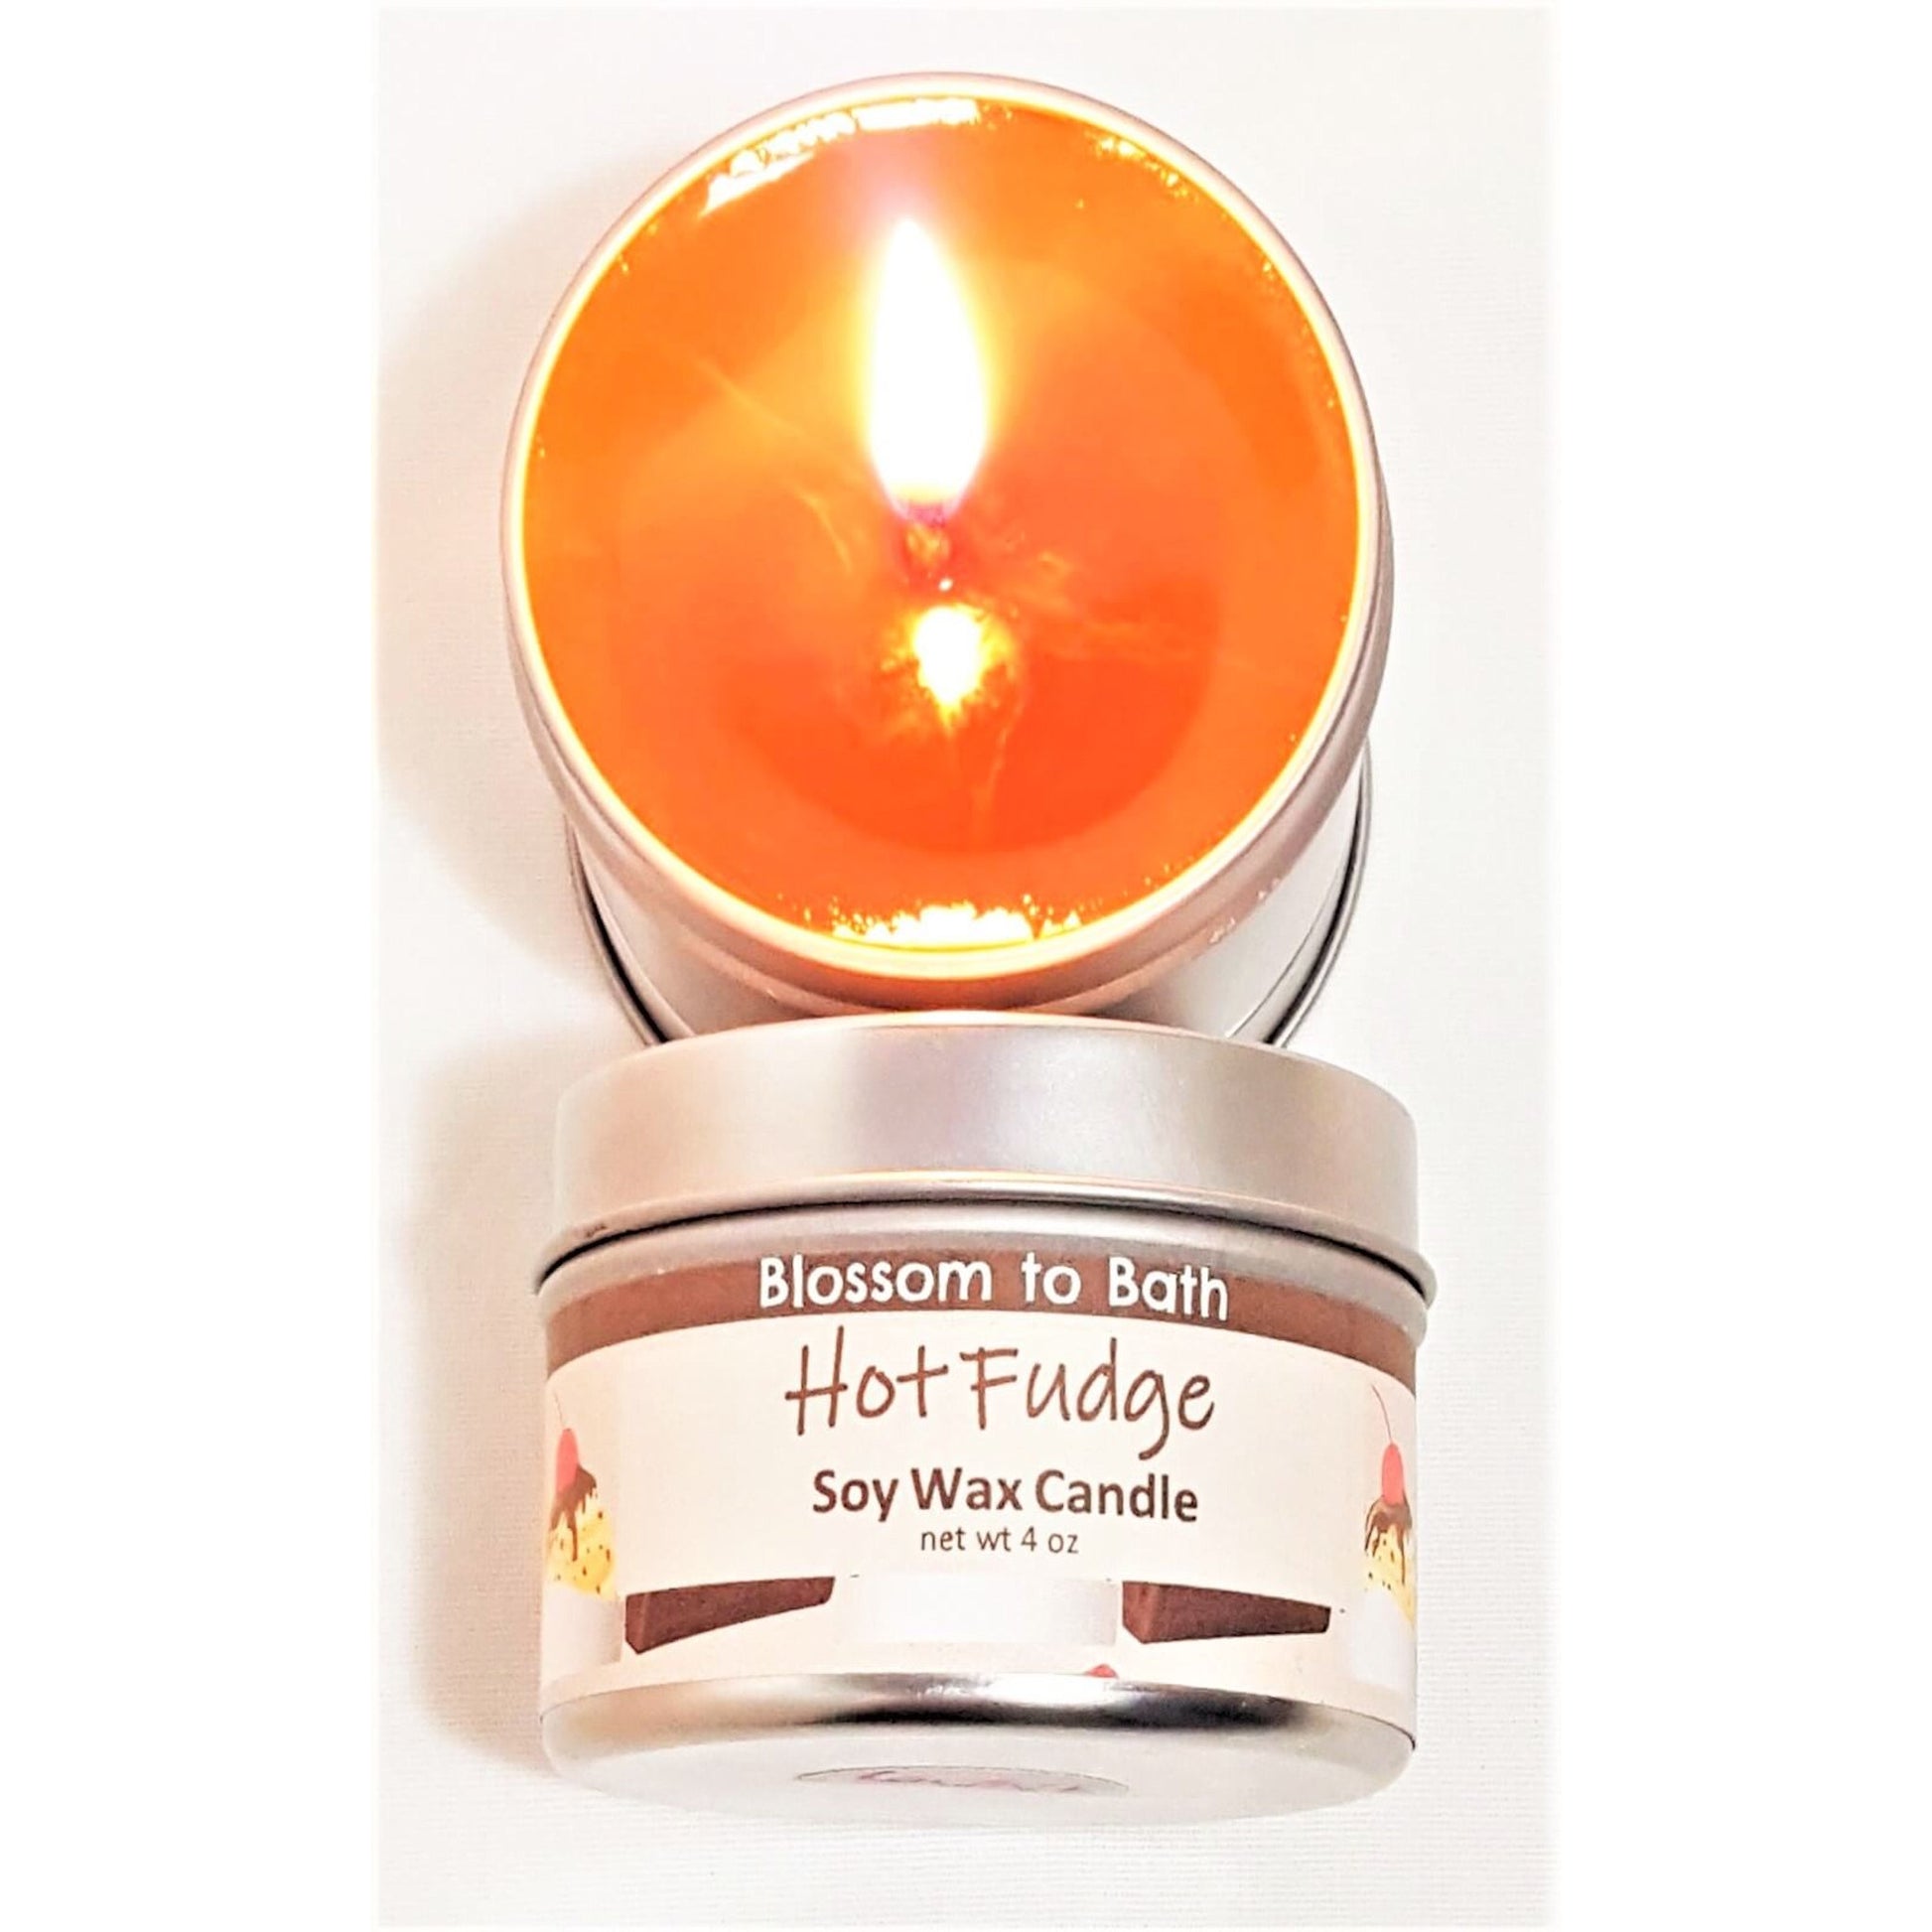 Hemp Coco Soy Candle Wax for Candle Making